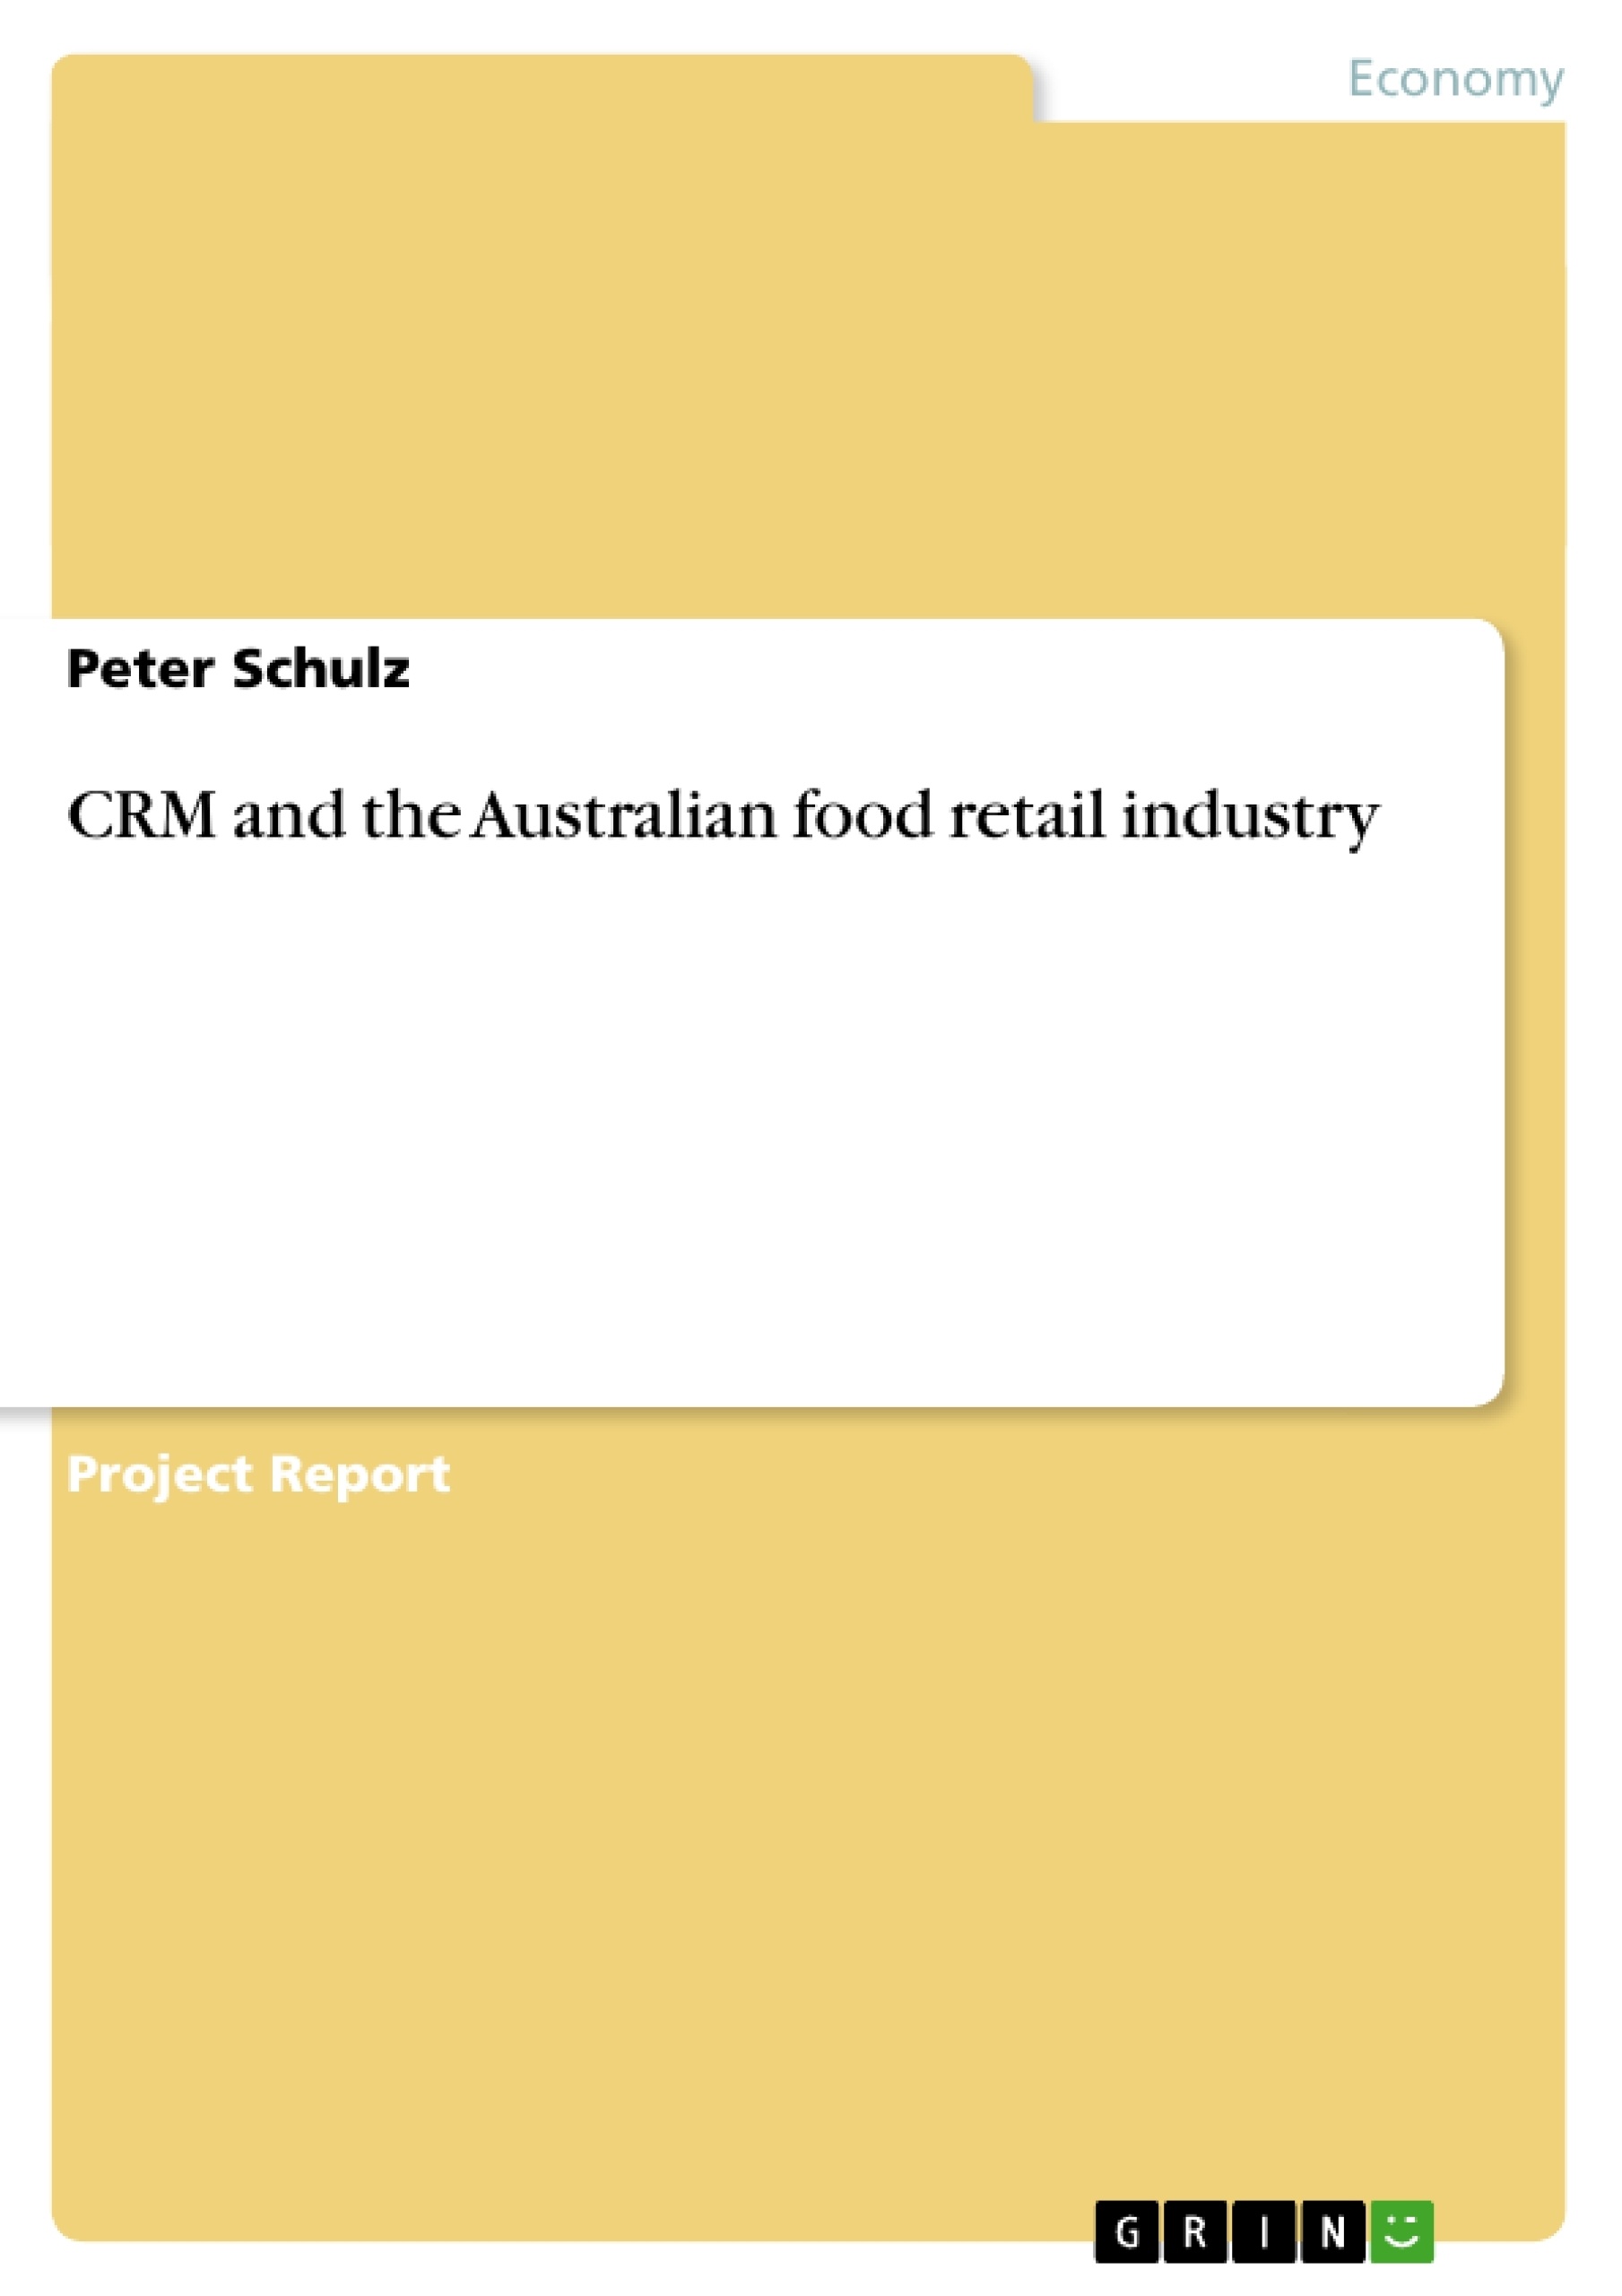 Title: CRM and the Australian food retail industry